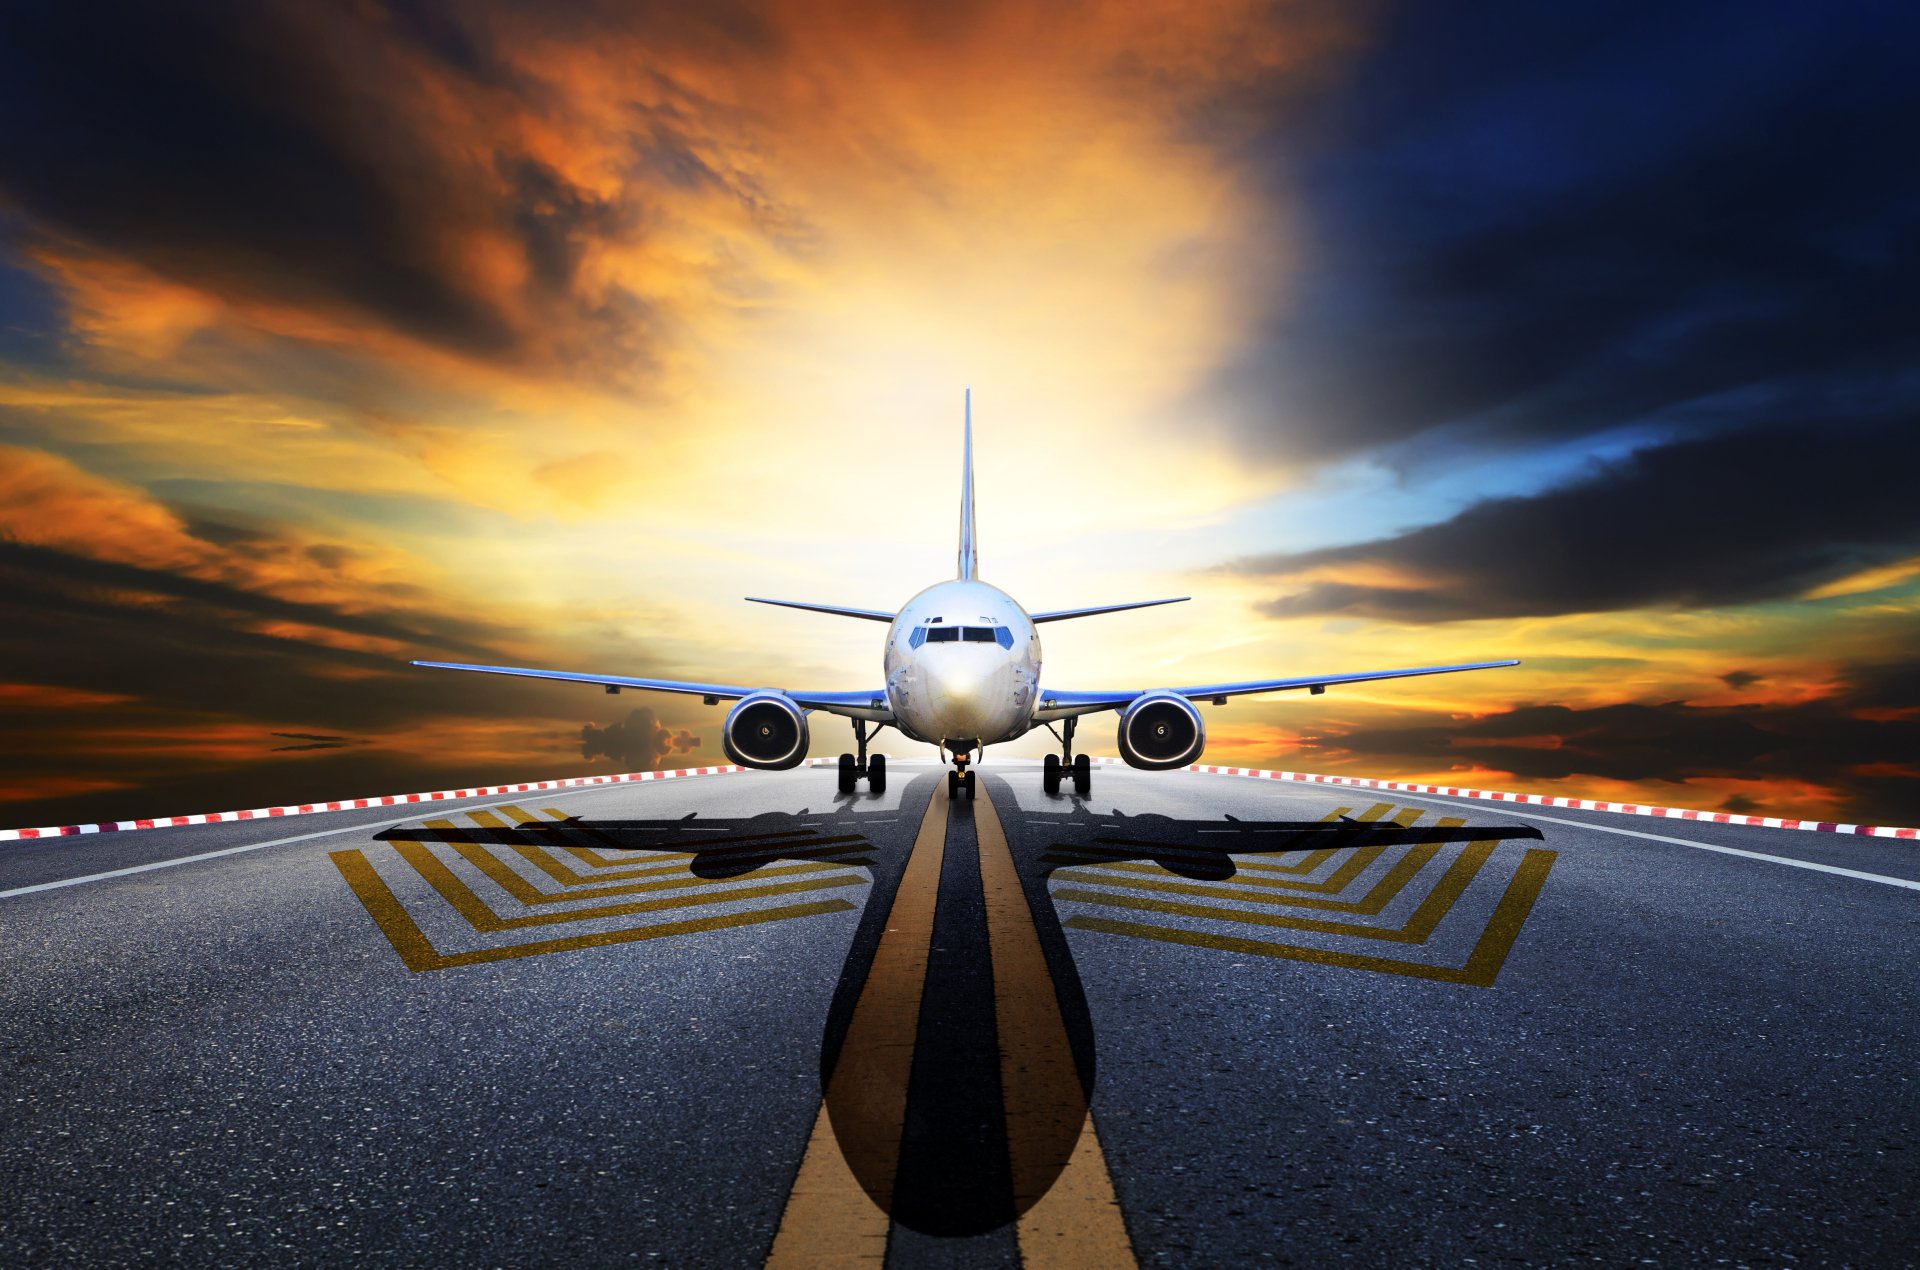 150+ Passenger Plane HD Wallpapers and Backgrounds